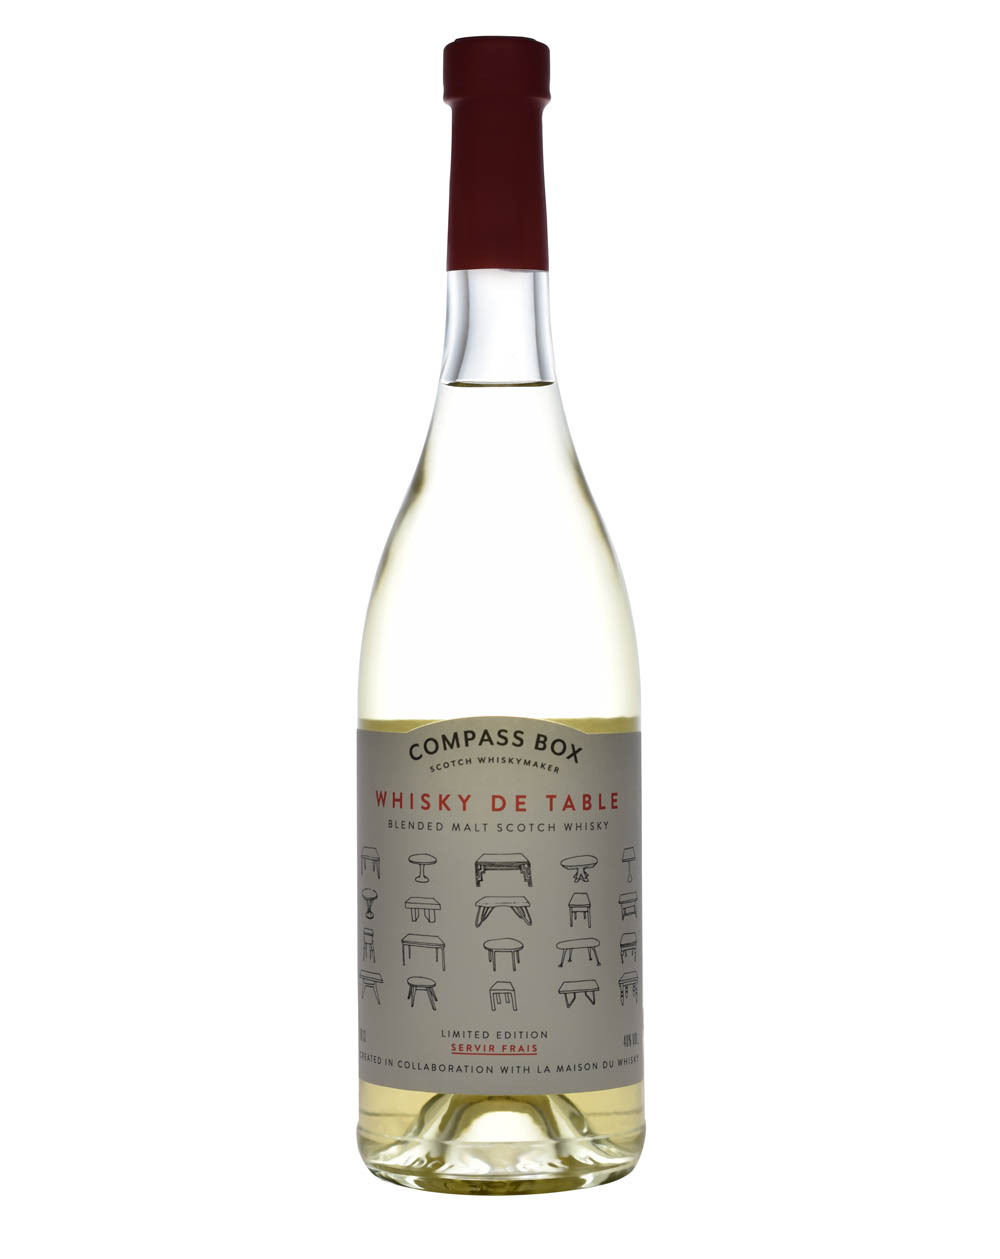 Compass Box Whisky De Table 2016 Musthave Malts MHM